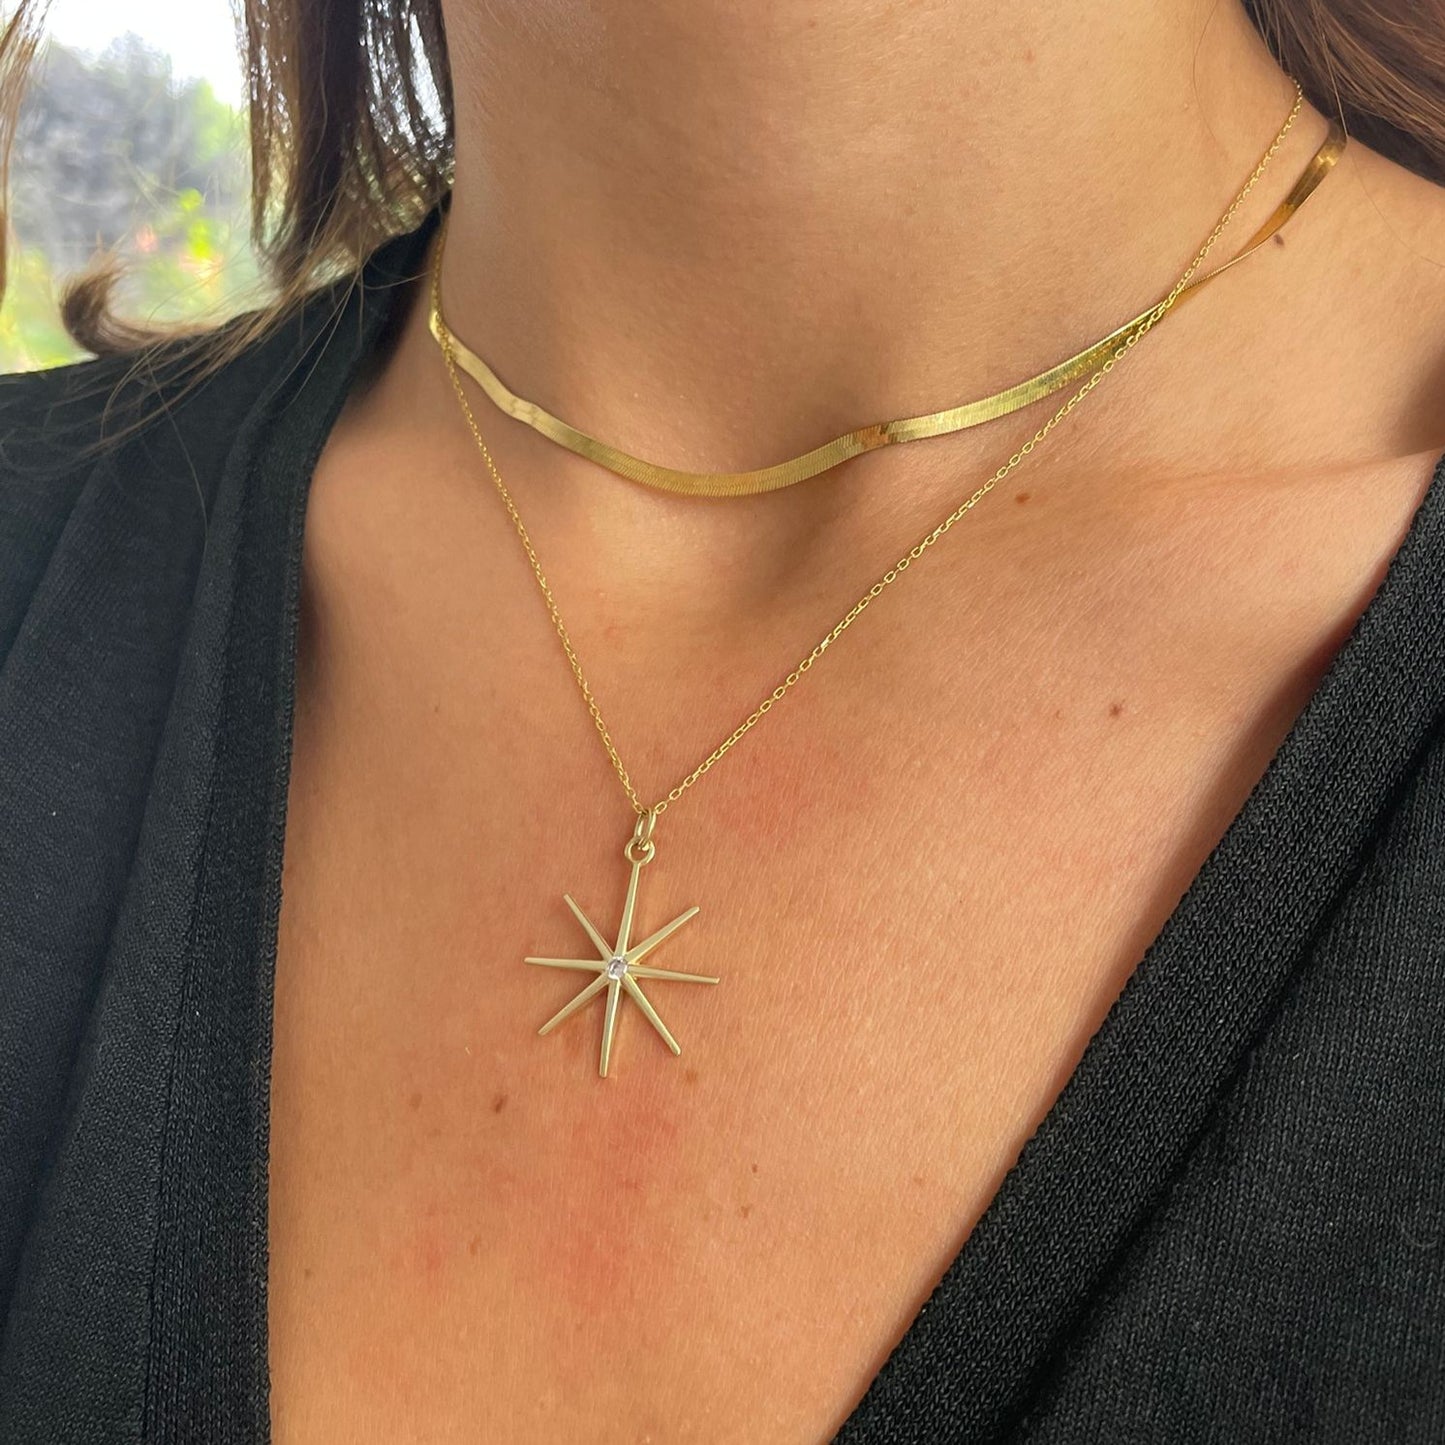 Silver necklace with star pendant